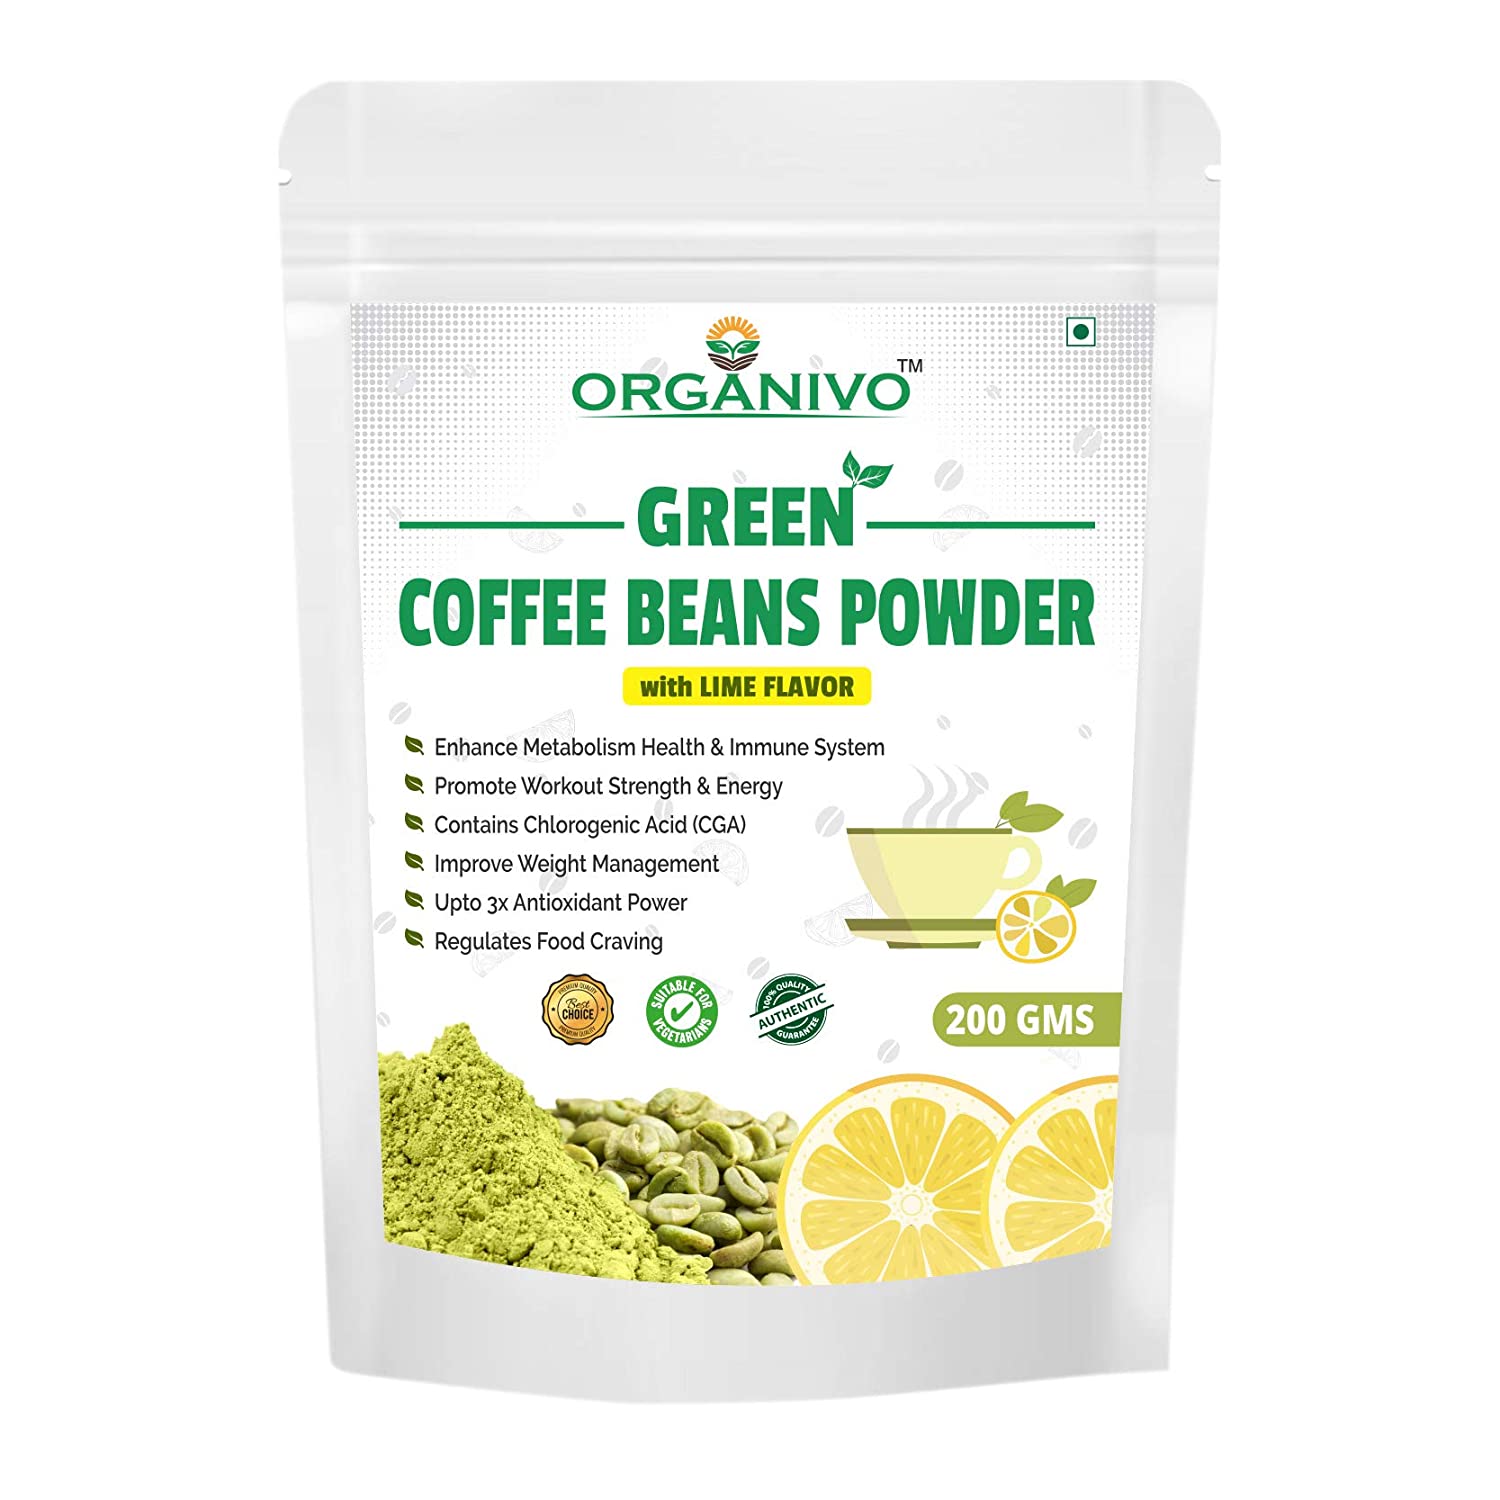 Organivo Natural Green Coffee Beans Powder For Weight Loss With Lime Flavour Image